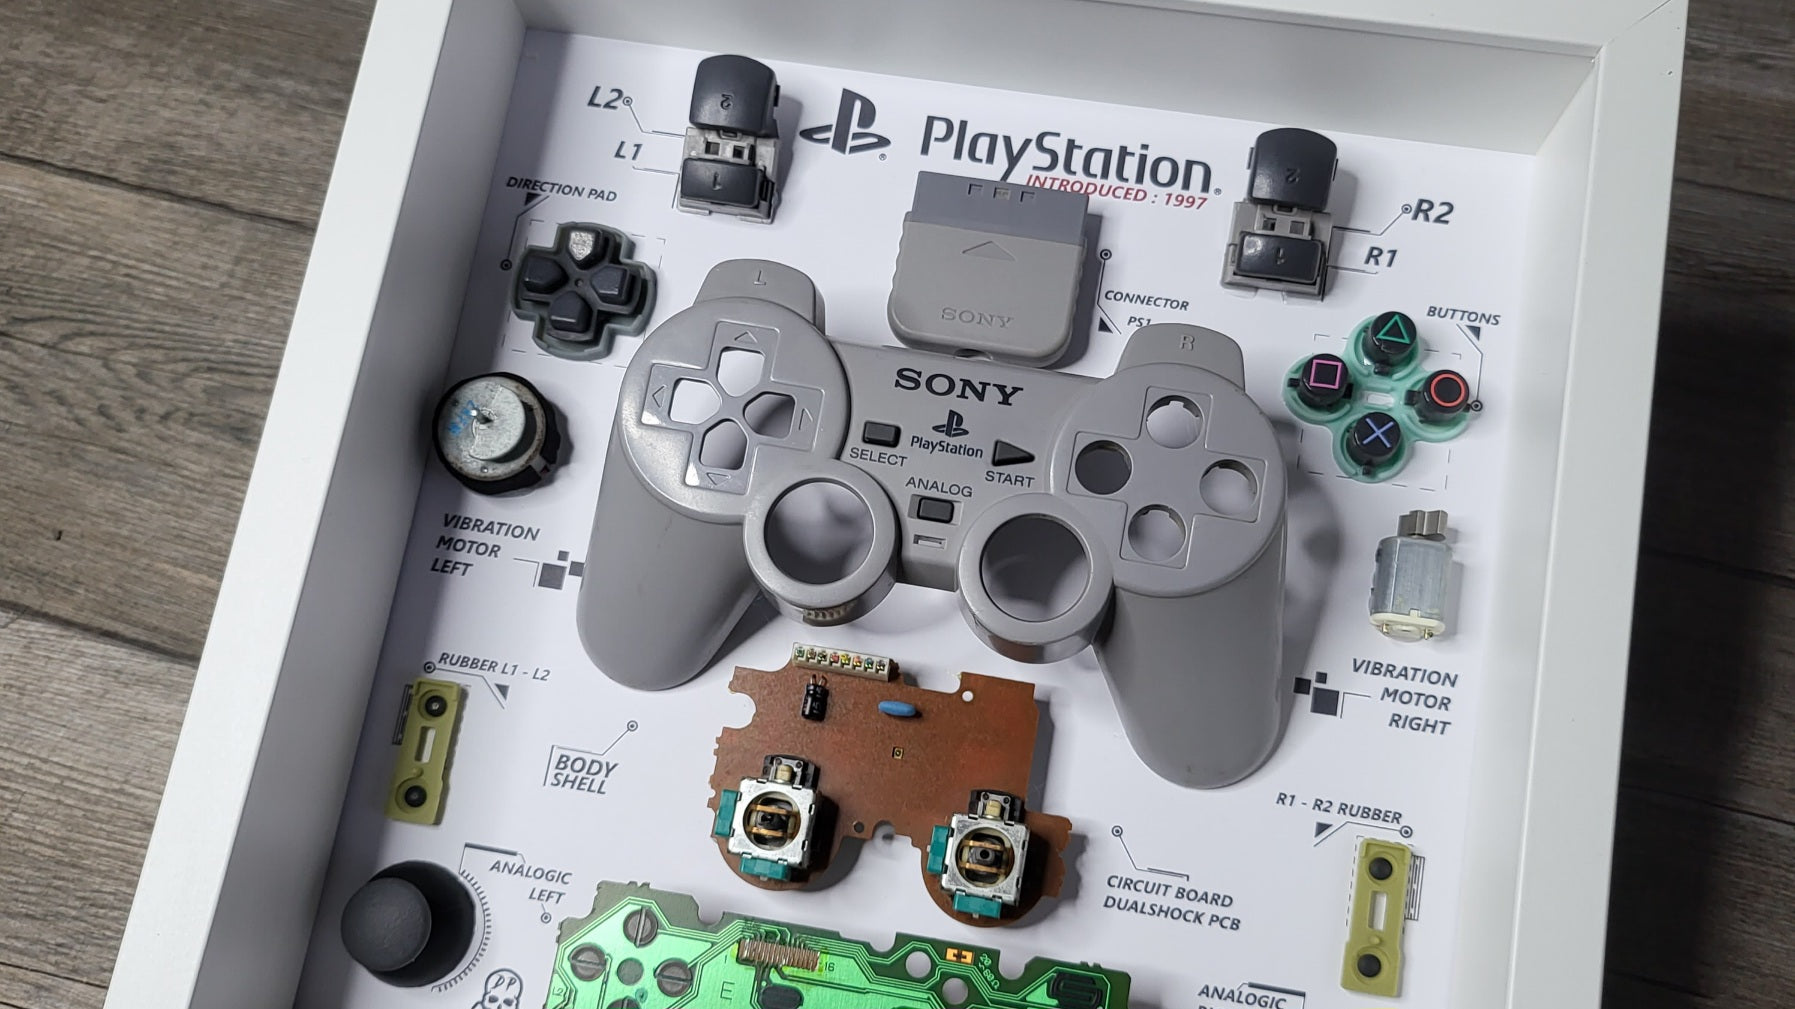 Custom shadow box frame with disassembled playstation controller inside